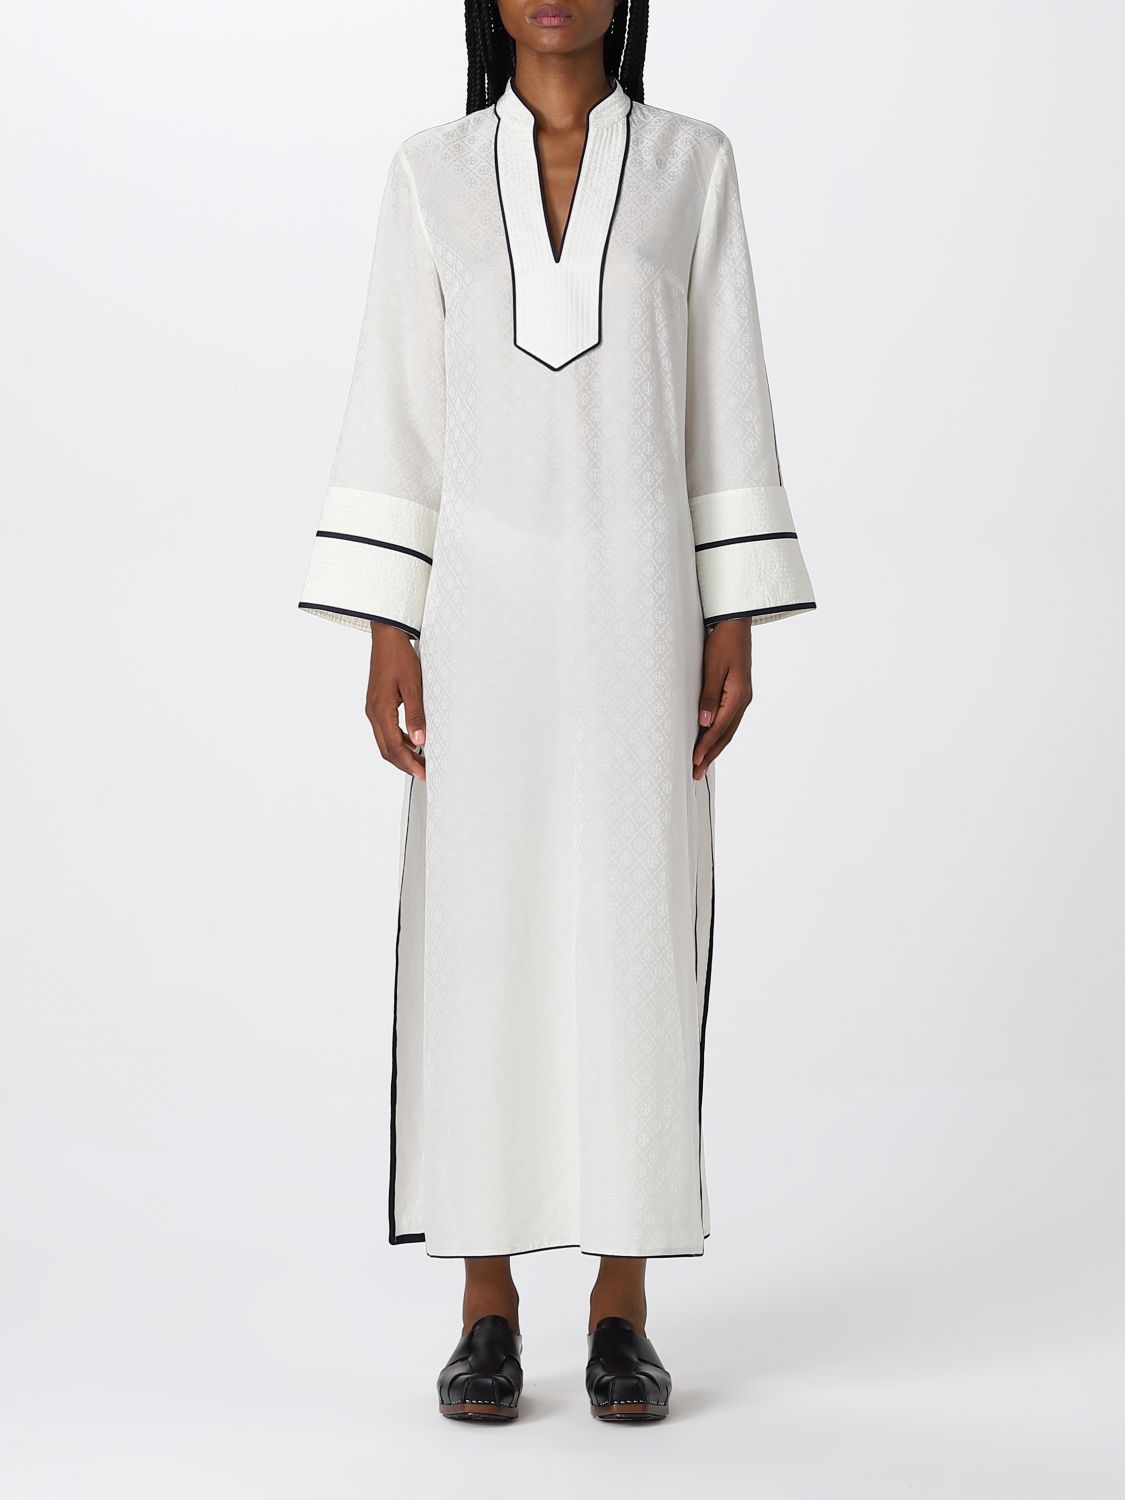 TORY BURCH: dress for woman - Ivory | Tory Burch dress 139554 online on  